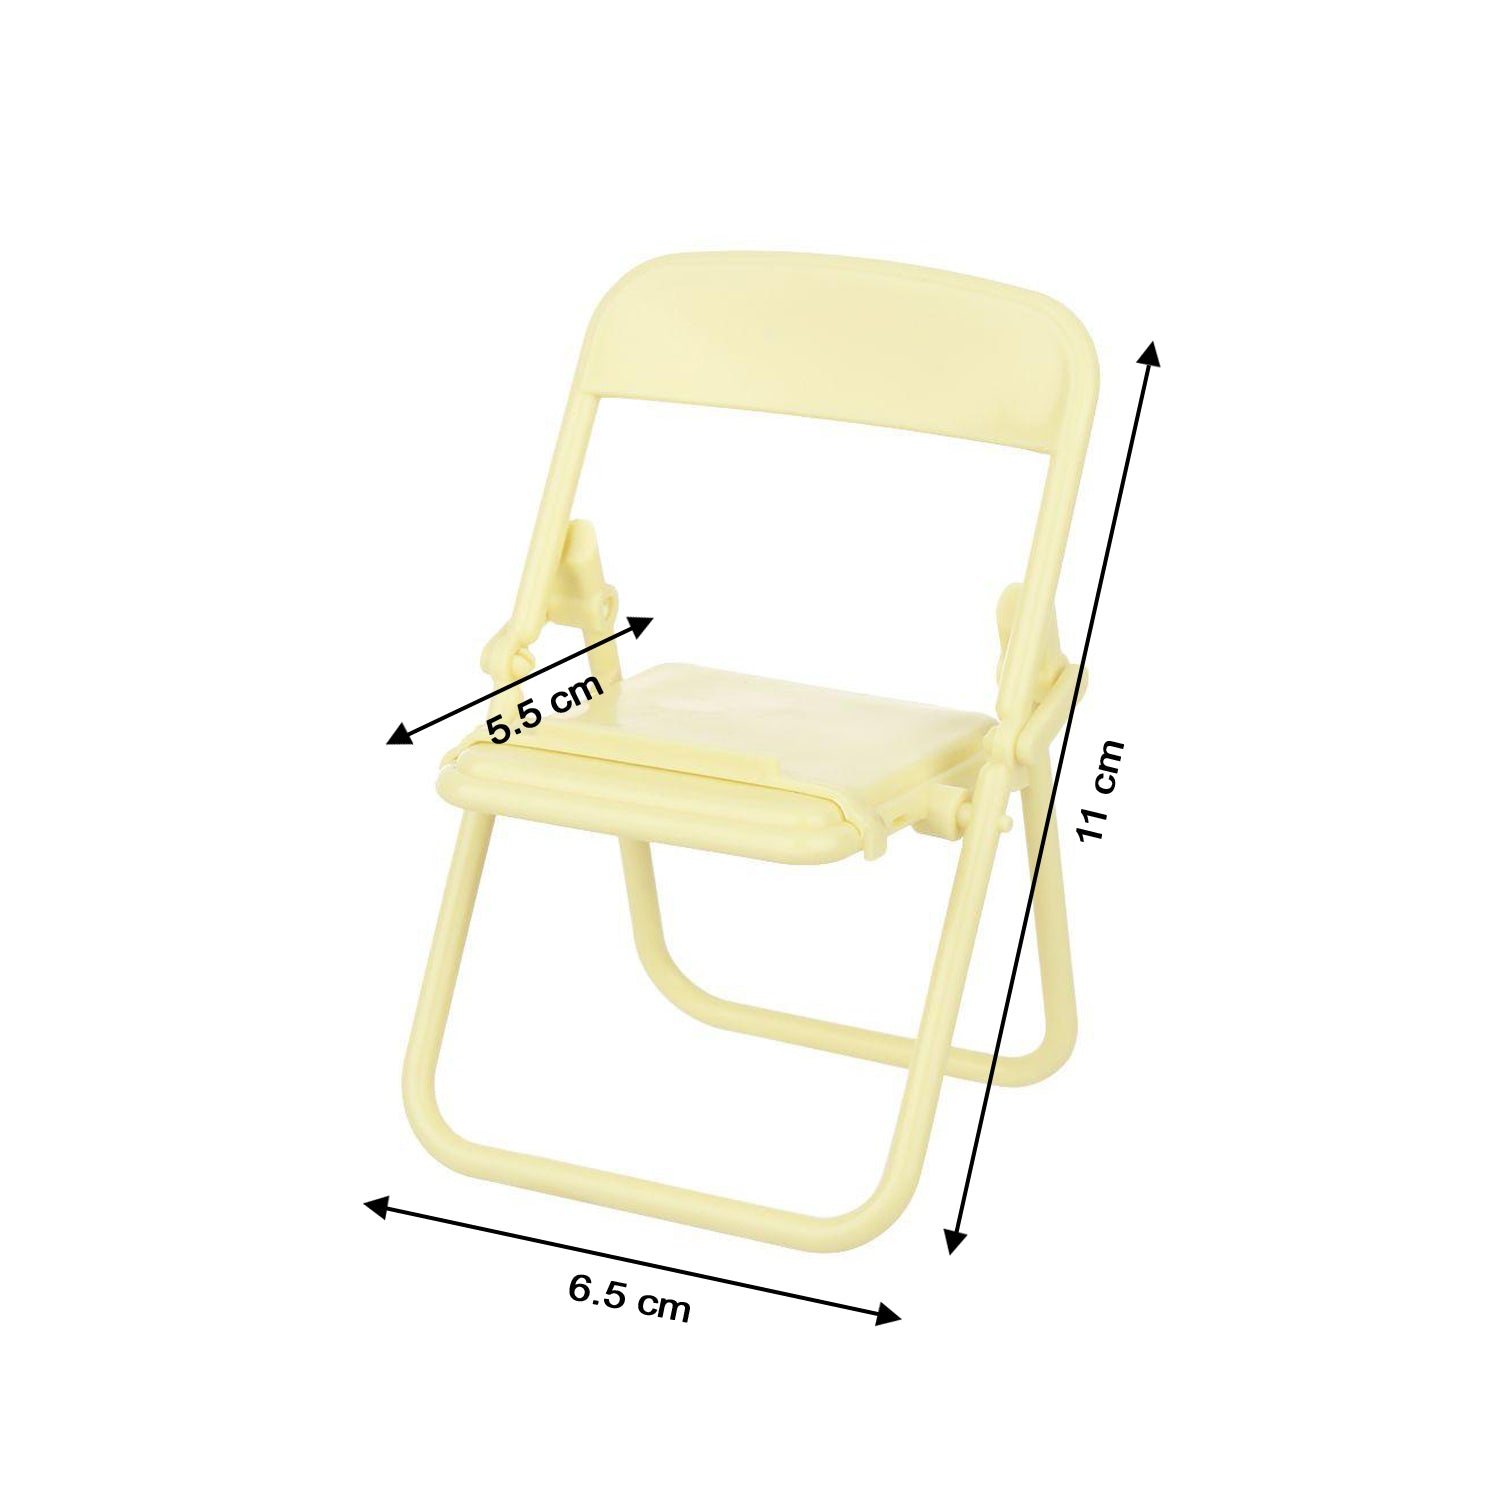 4797 1 Pc Chair Mobile Stand used in all kinds of household and official purposes as a stand and holder for mobiles and smartphones etc. DeoDap